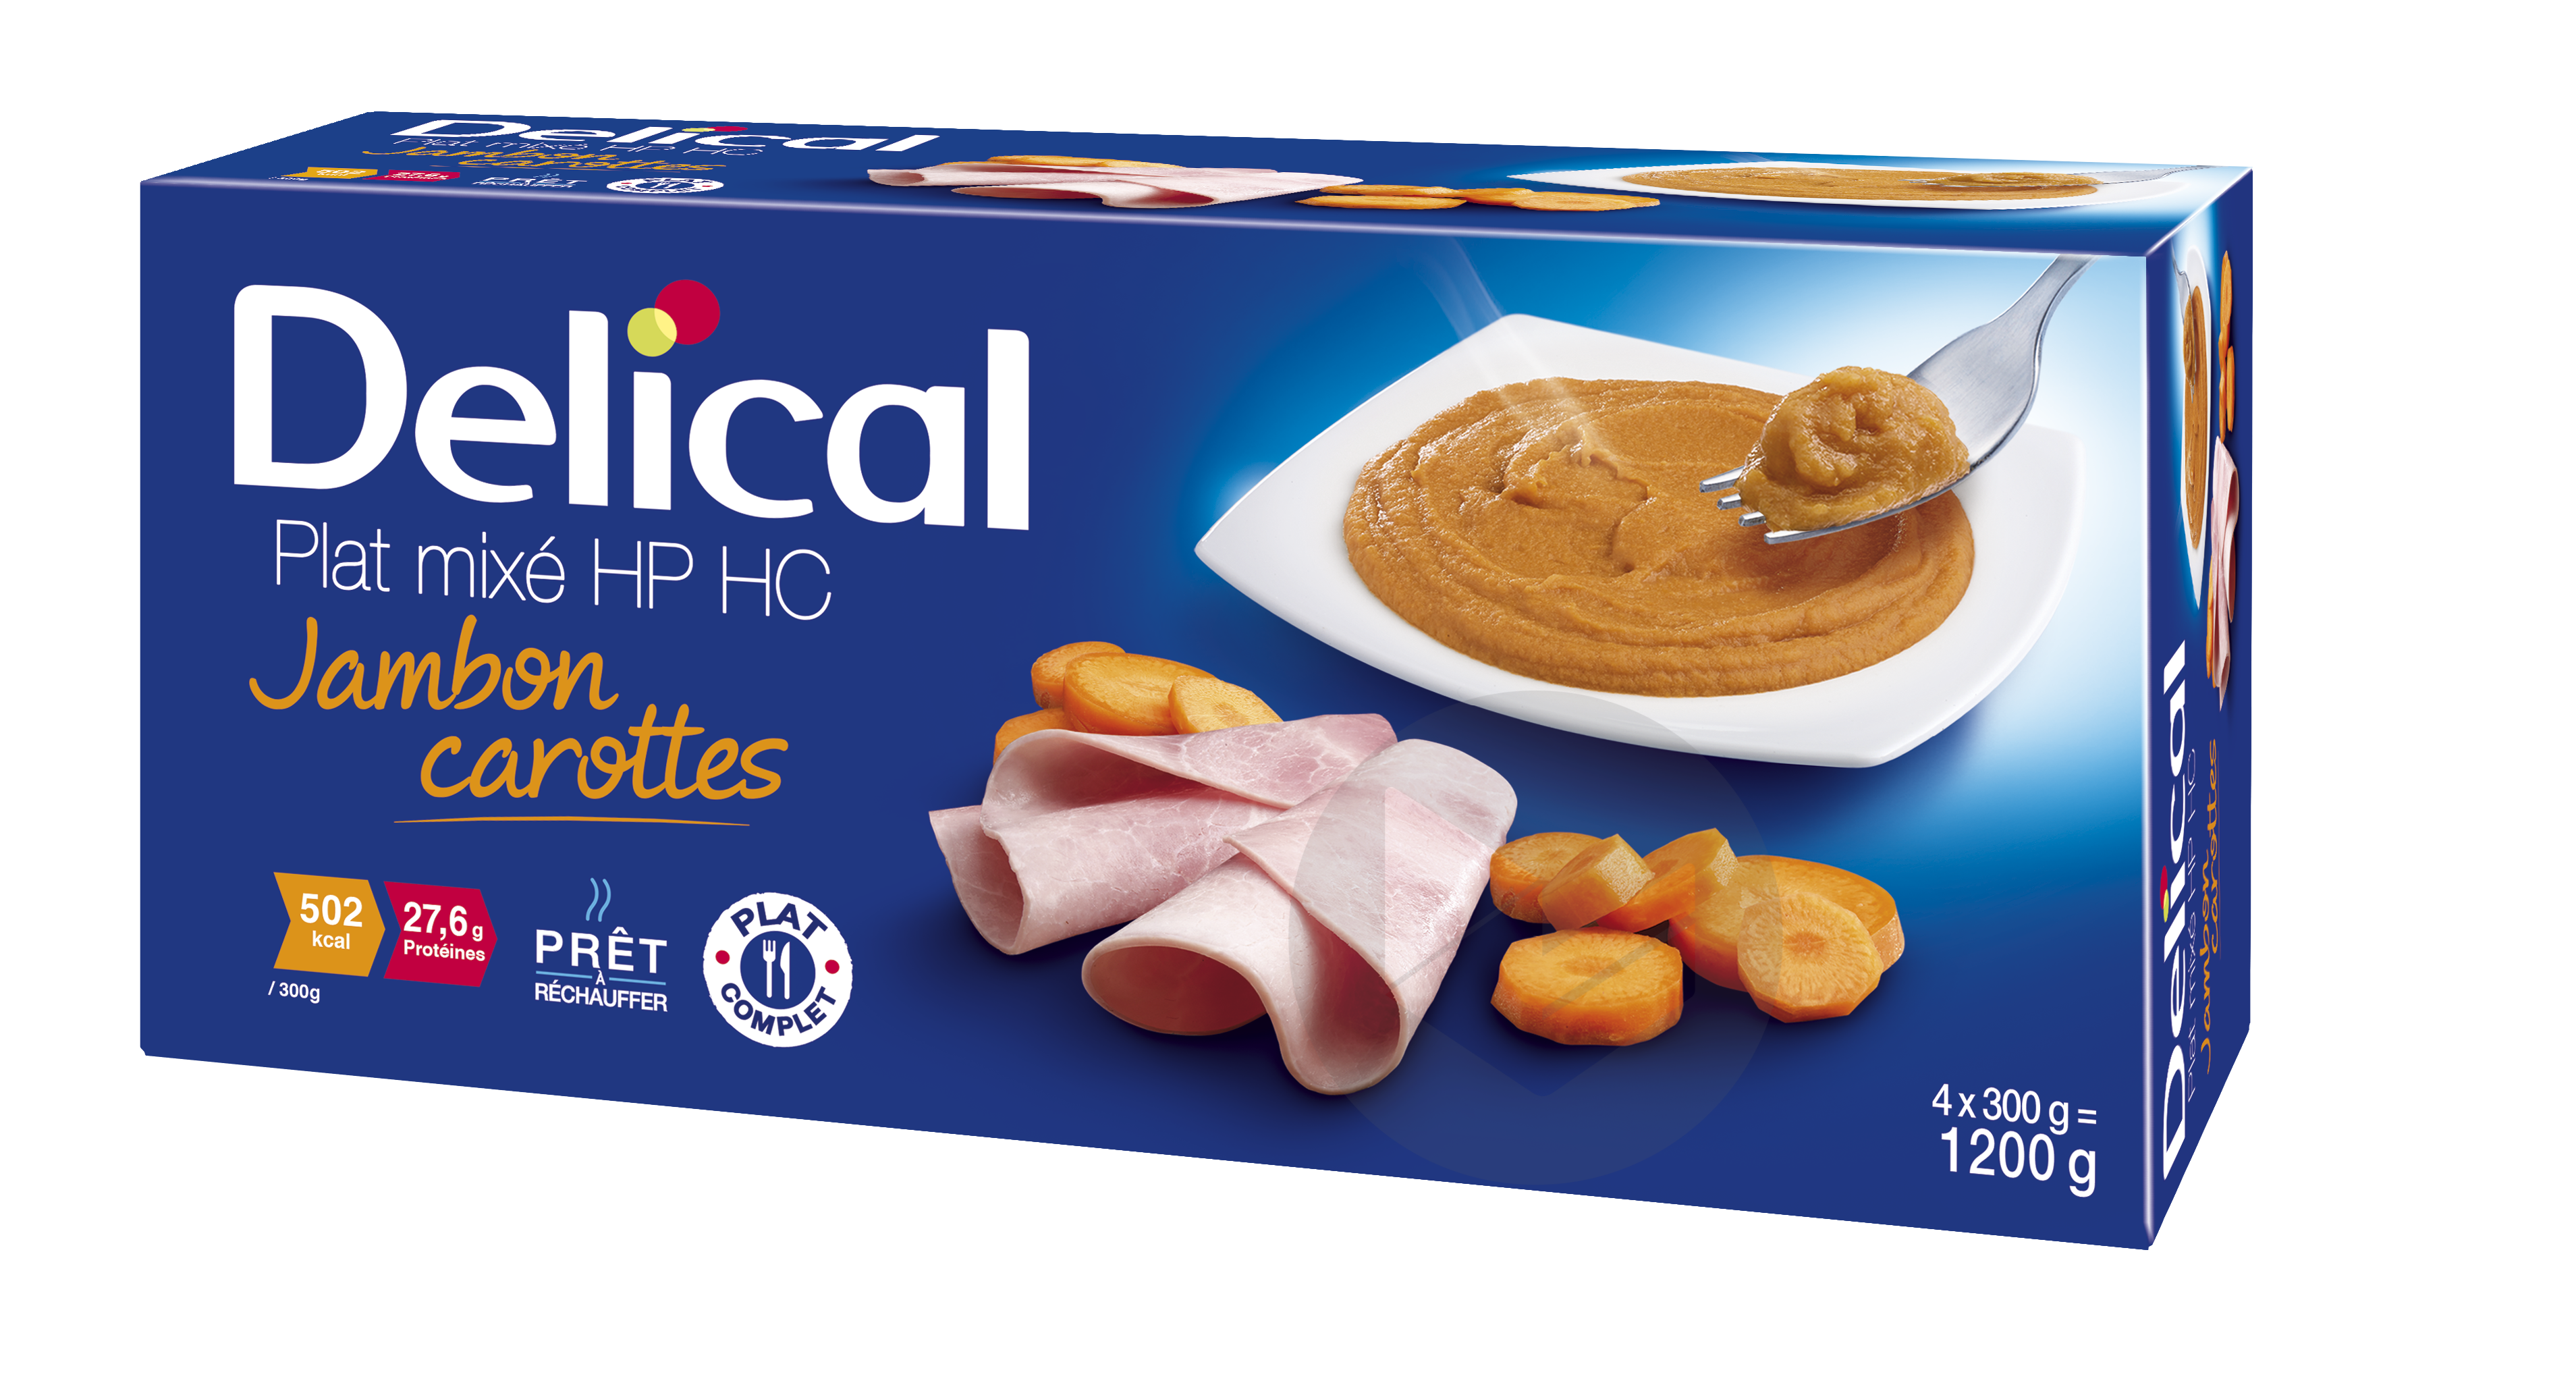 DELICAL Nutra’ Mix HP HC Jambon Carottes